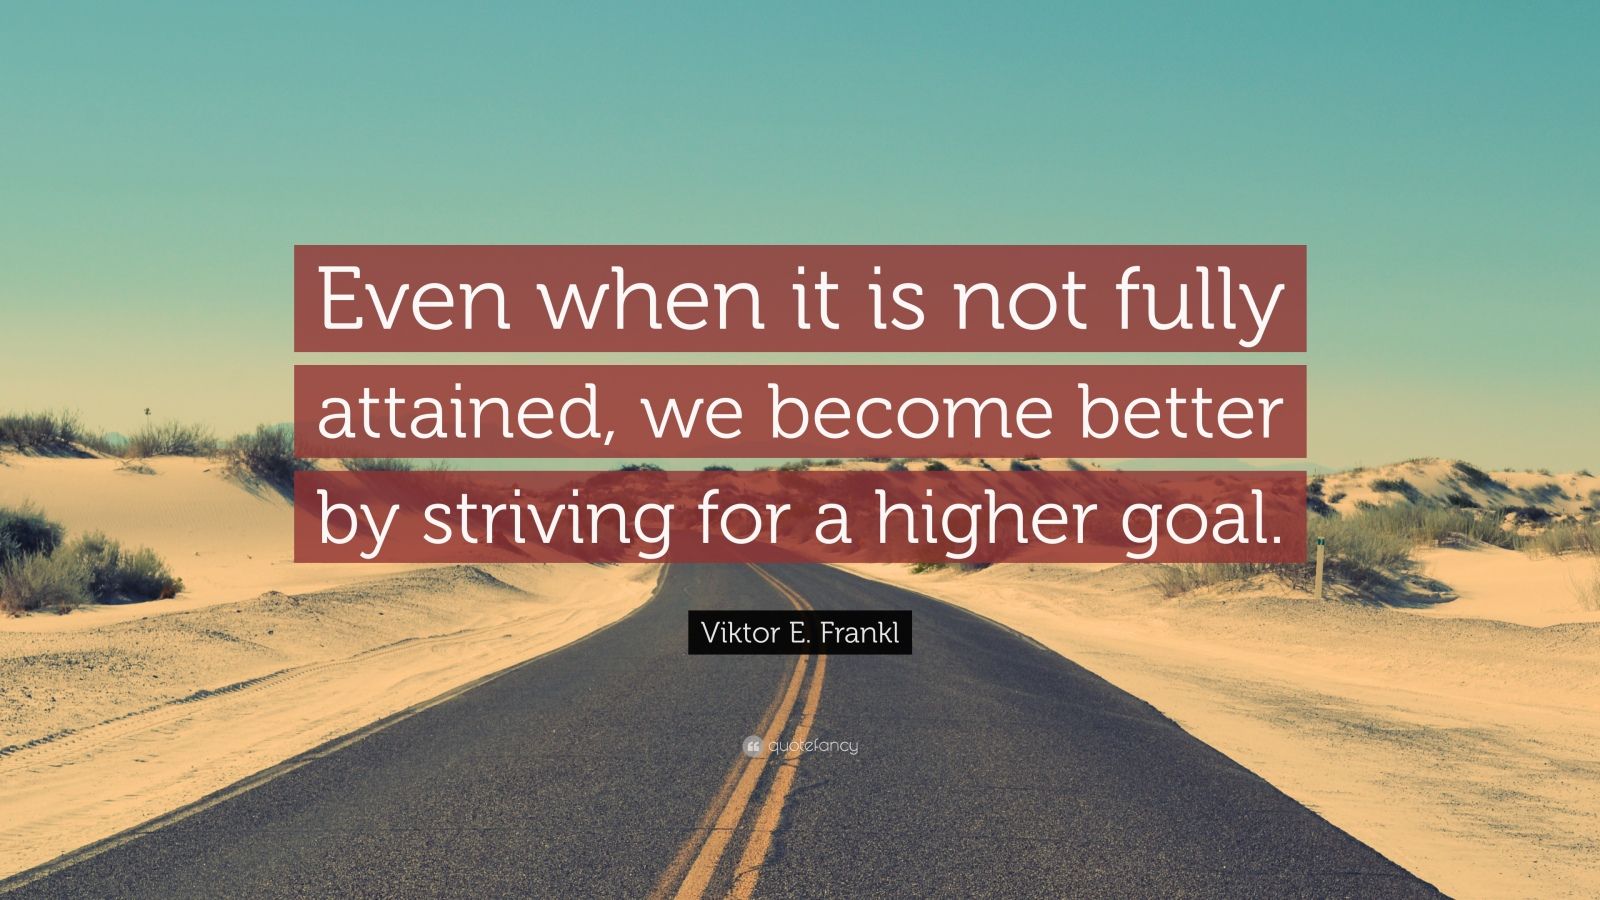 Viktor E. Frankl Quote: “Even when it is not fully attained, we become ...